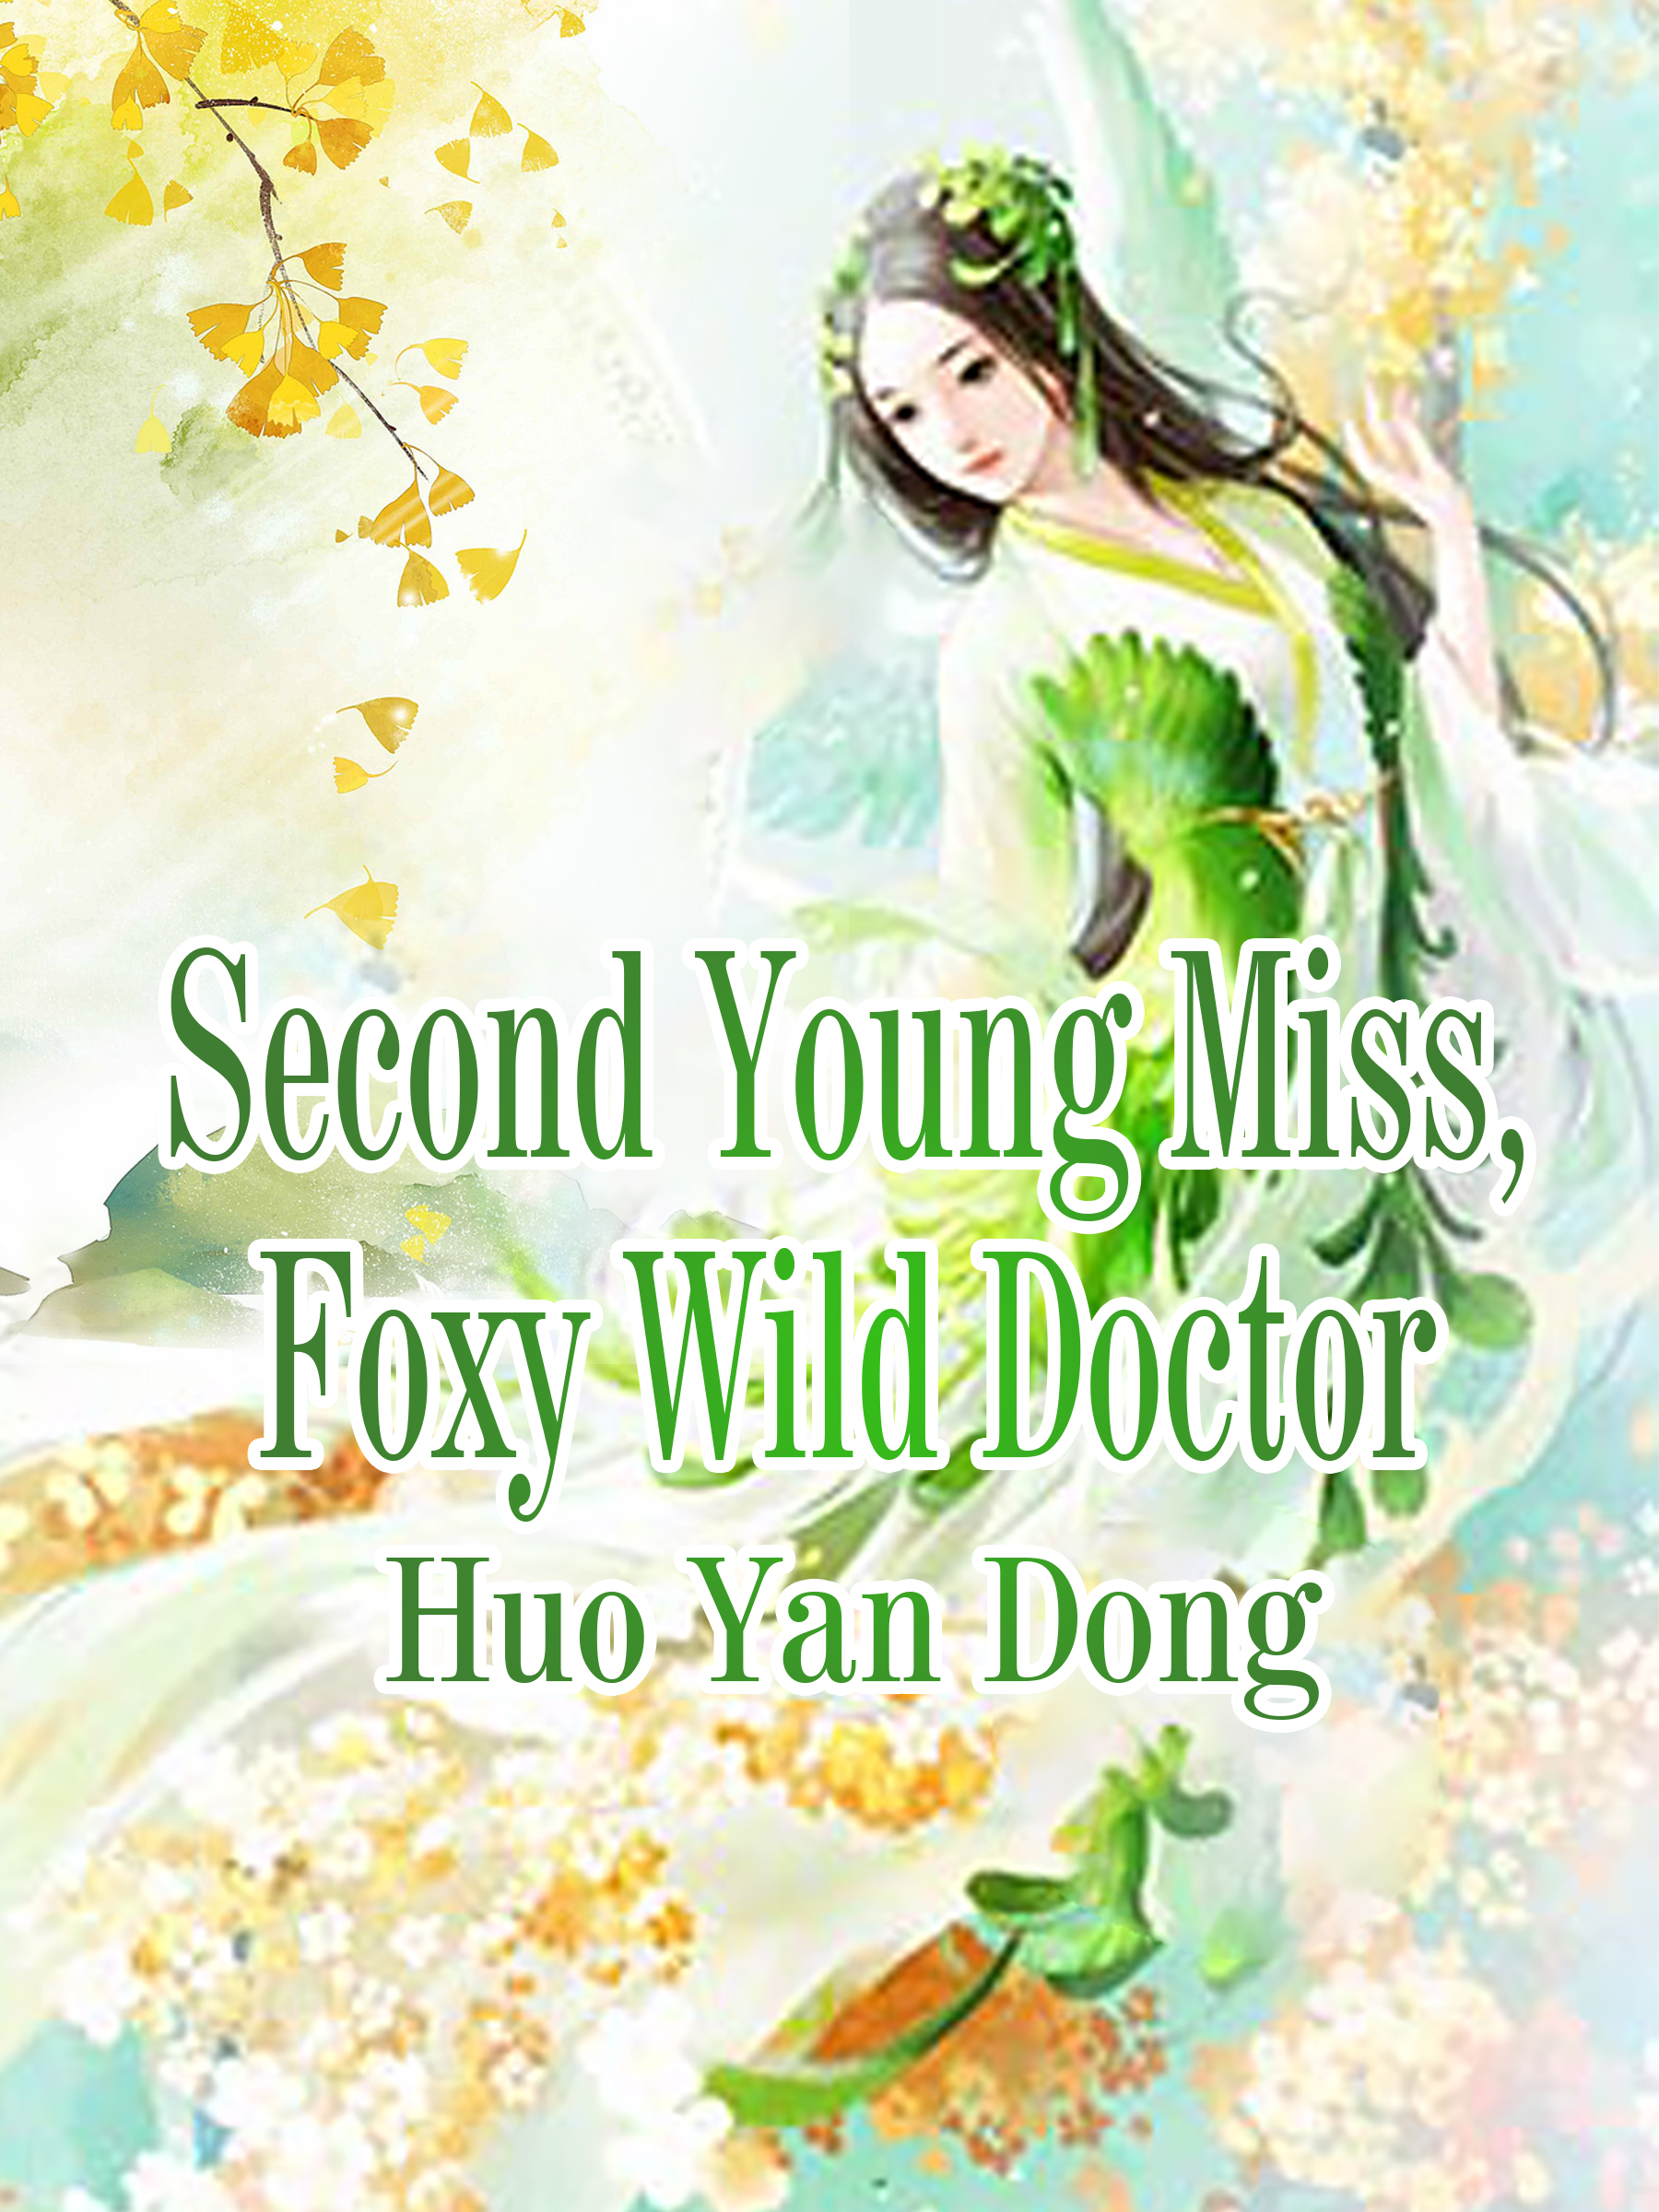 Second Young Miss, Foxy Wild Doctor